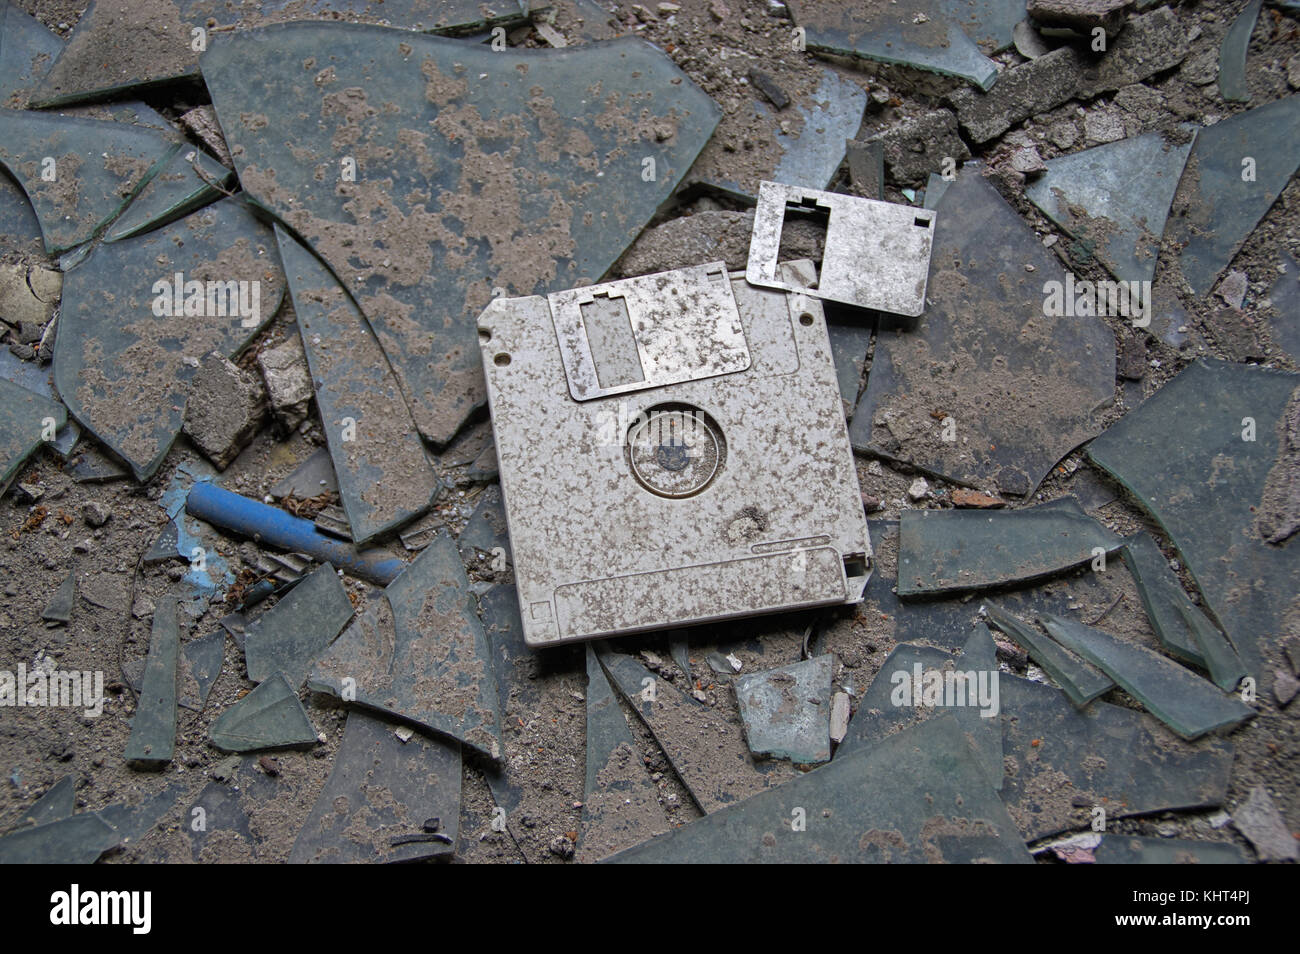 Destroyed and abandoned vintage floppy disc. Forgotten technologies - 3.5 inch disk in plastic case on broken glass. Stock Photo